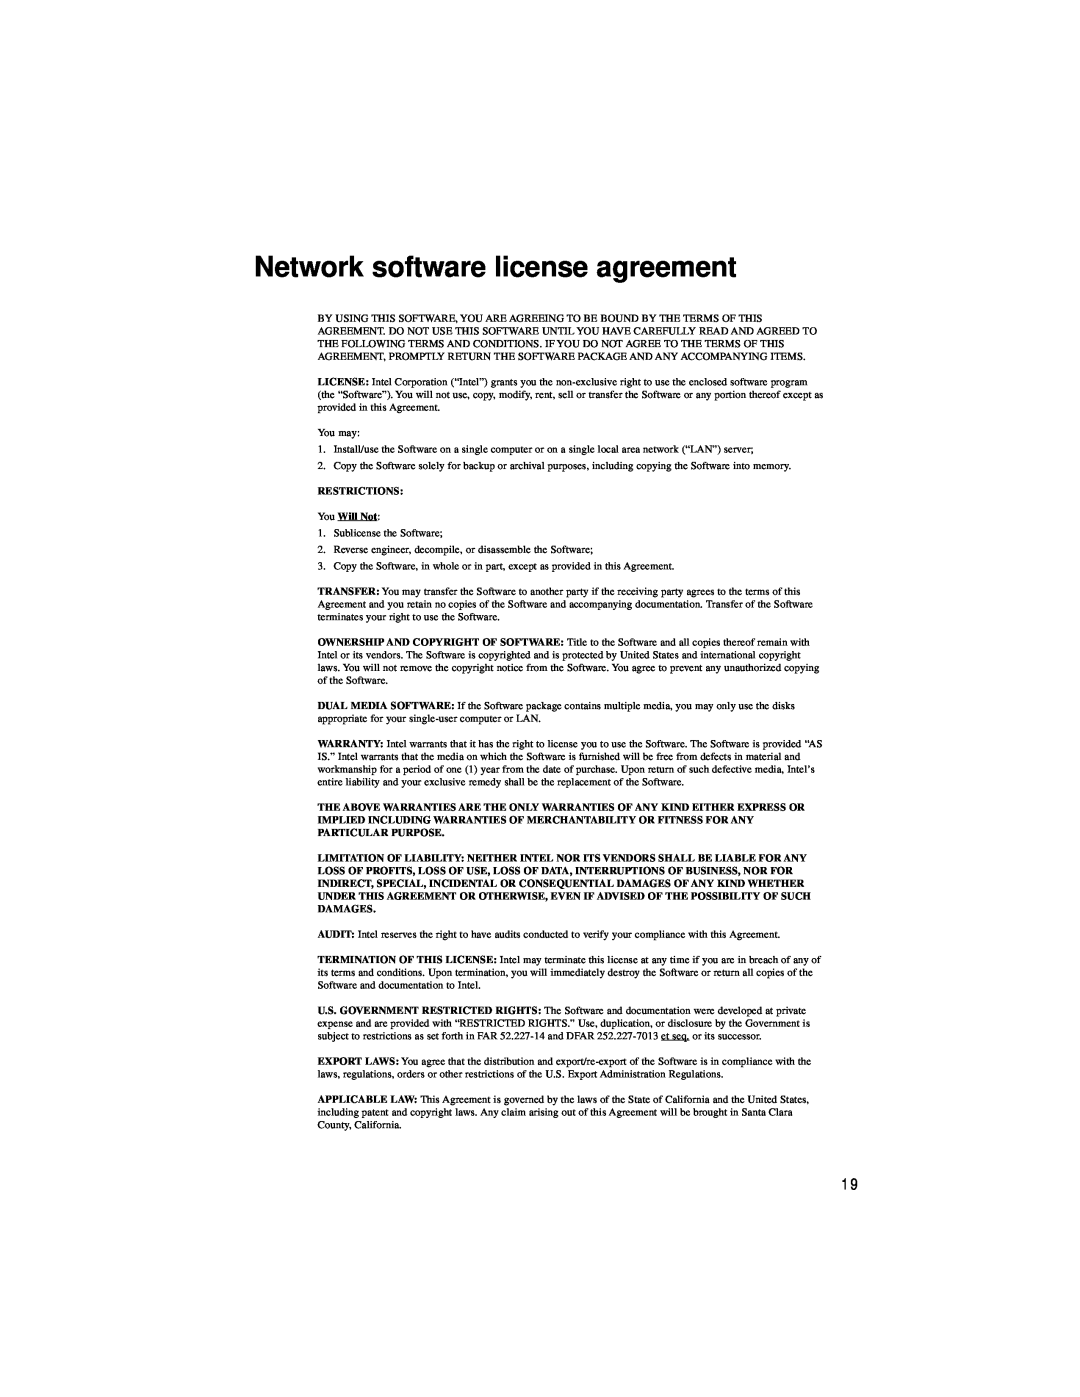 Intel PRO/100 TX PCI manual Network software license agreement 